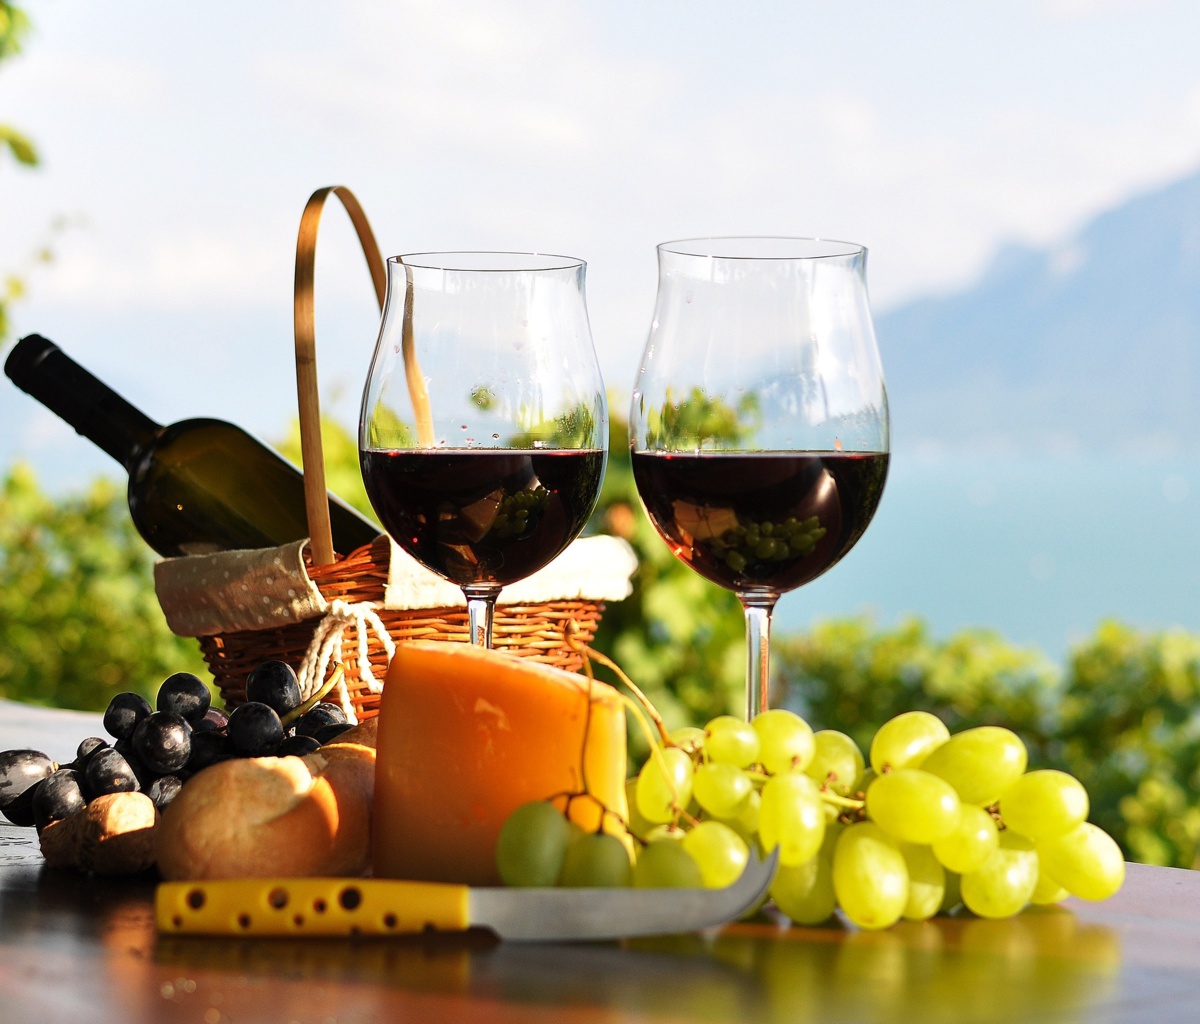 Picnic with wine and grapes screenshot #1 1200x1024